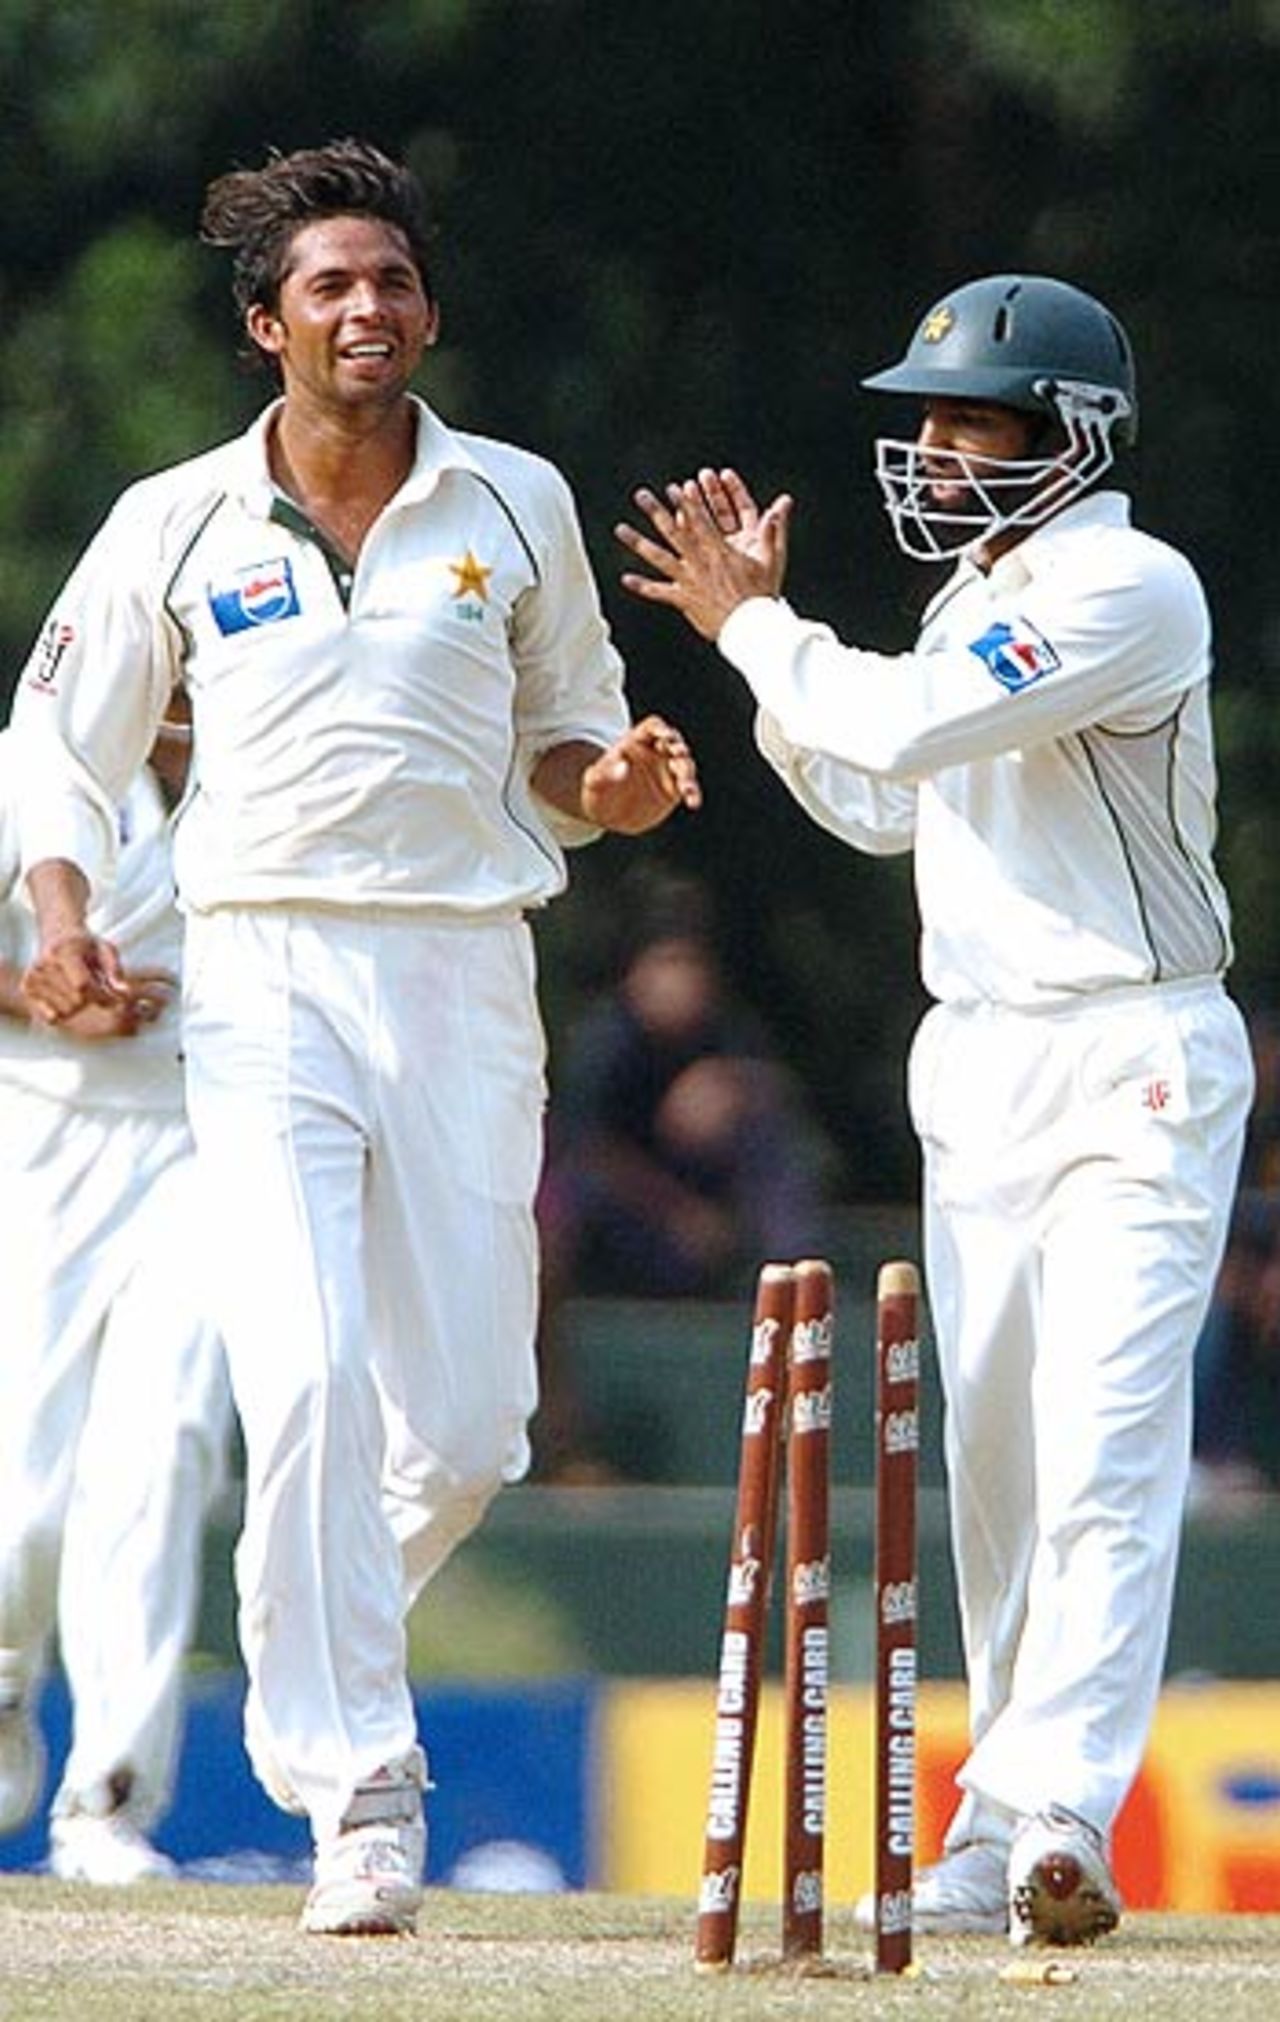 Mohammad Asif nails his first victim as Mohammad Yousuf looks on, Sri Lanka v Pakistan, 2nd Test, Kandy, 2nd day, April 4 2006